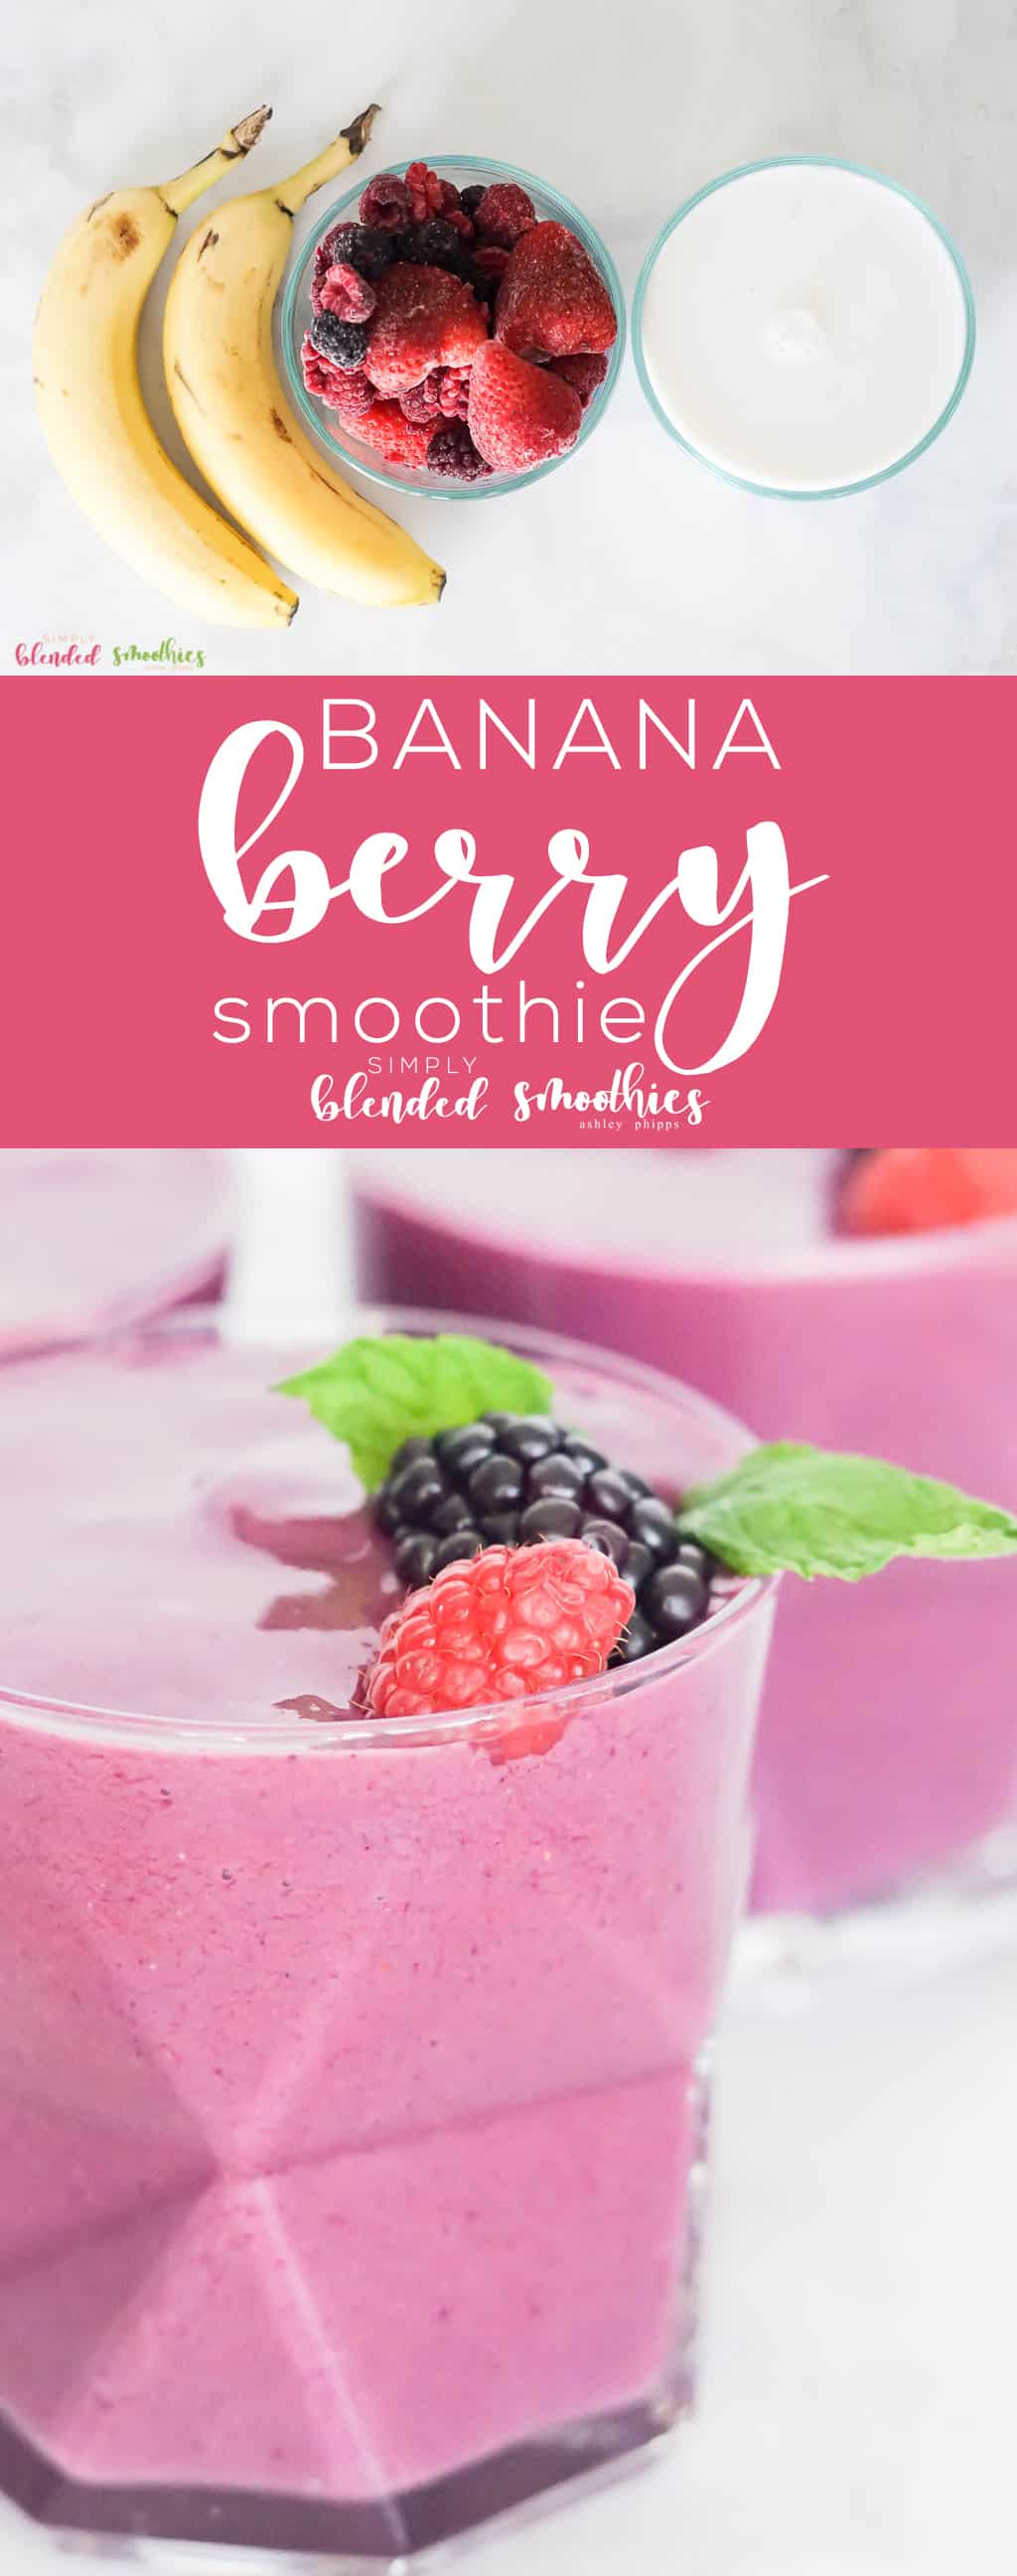 Banana Berry Smoothie - This Delicious Smoothie Is So Easy To Make And A Family Favorite In Our House